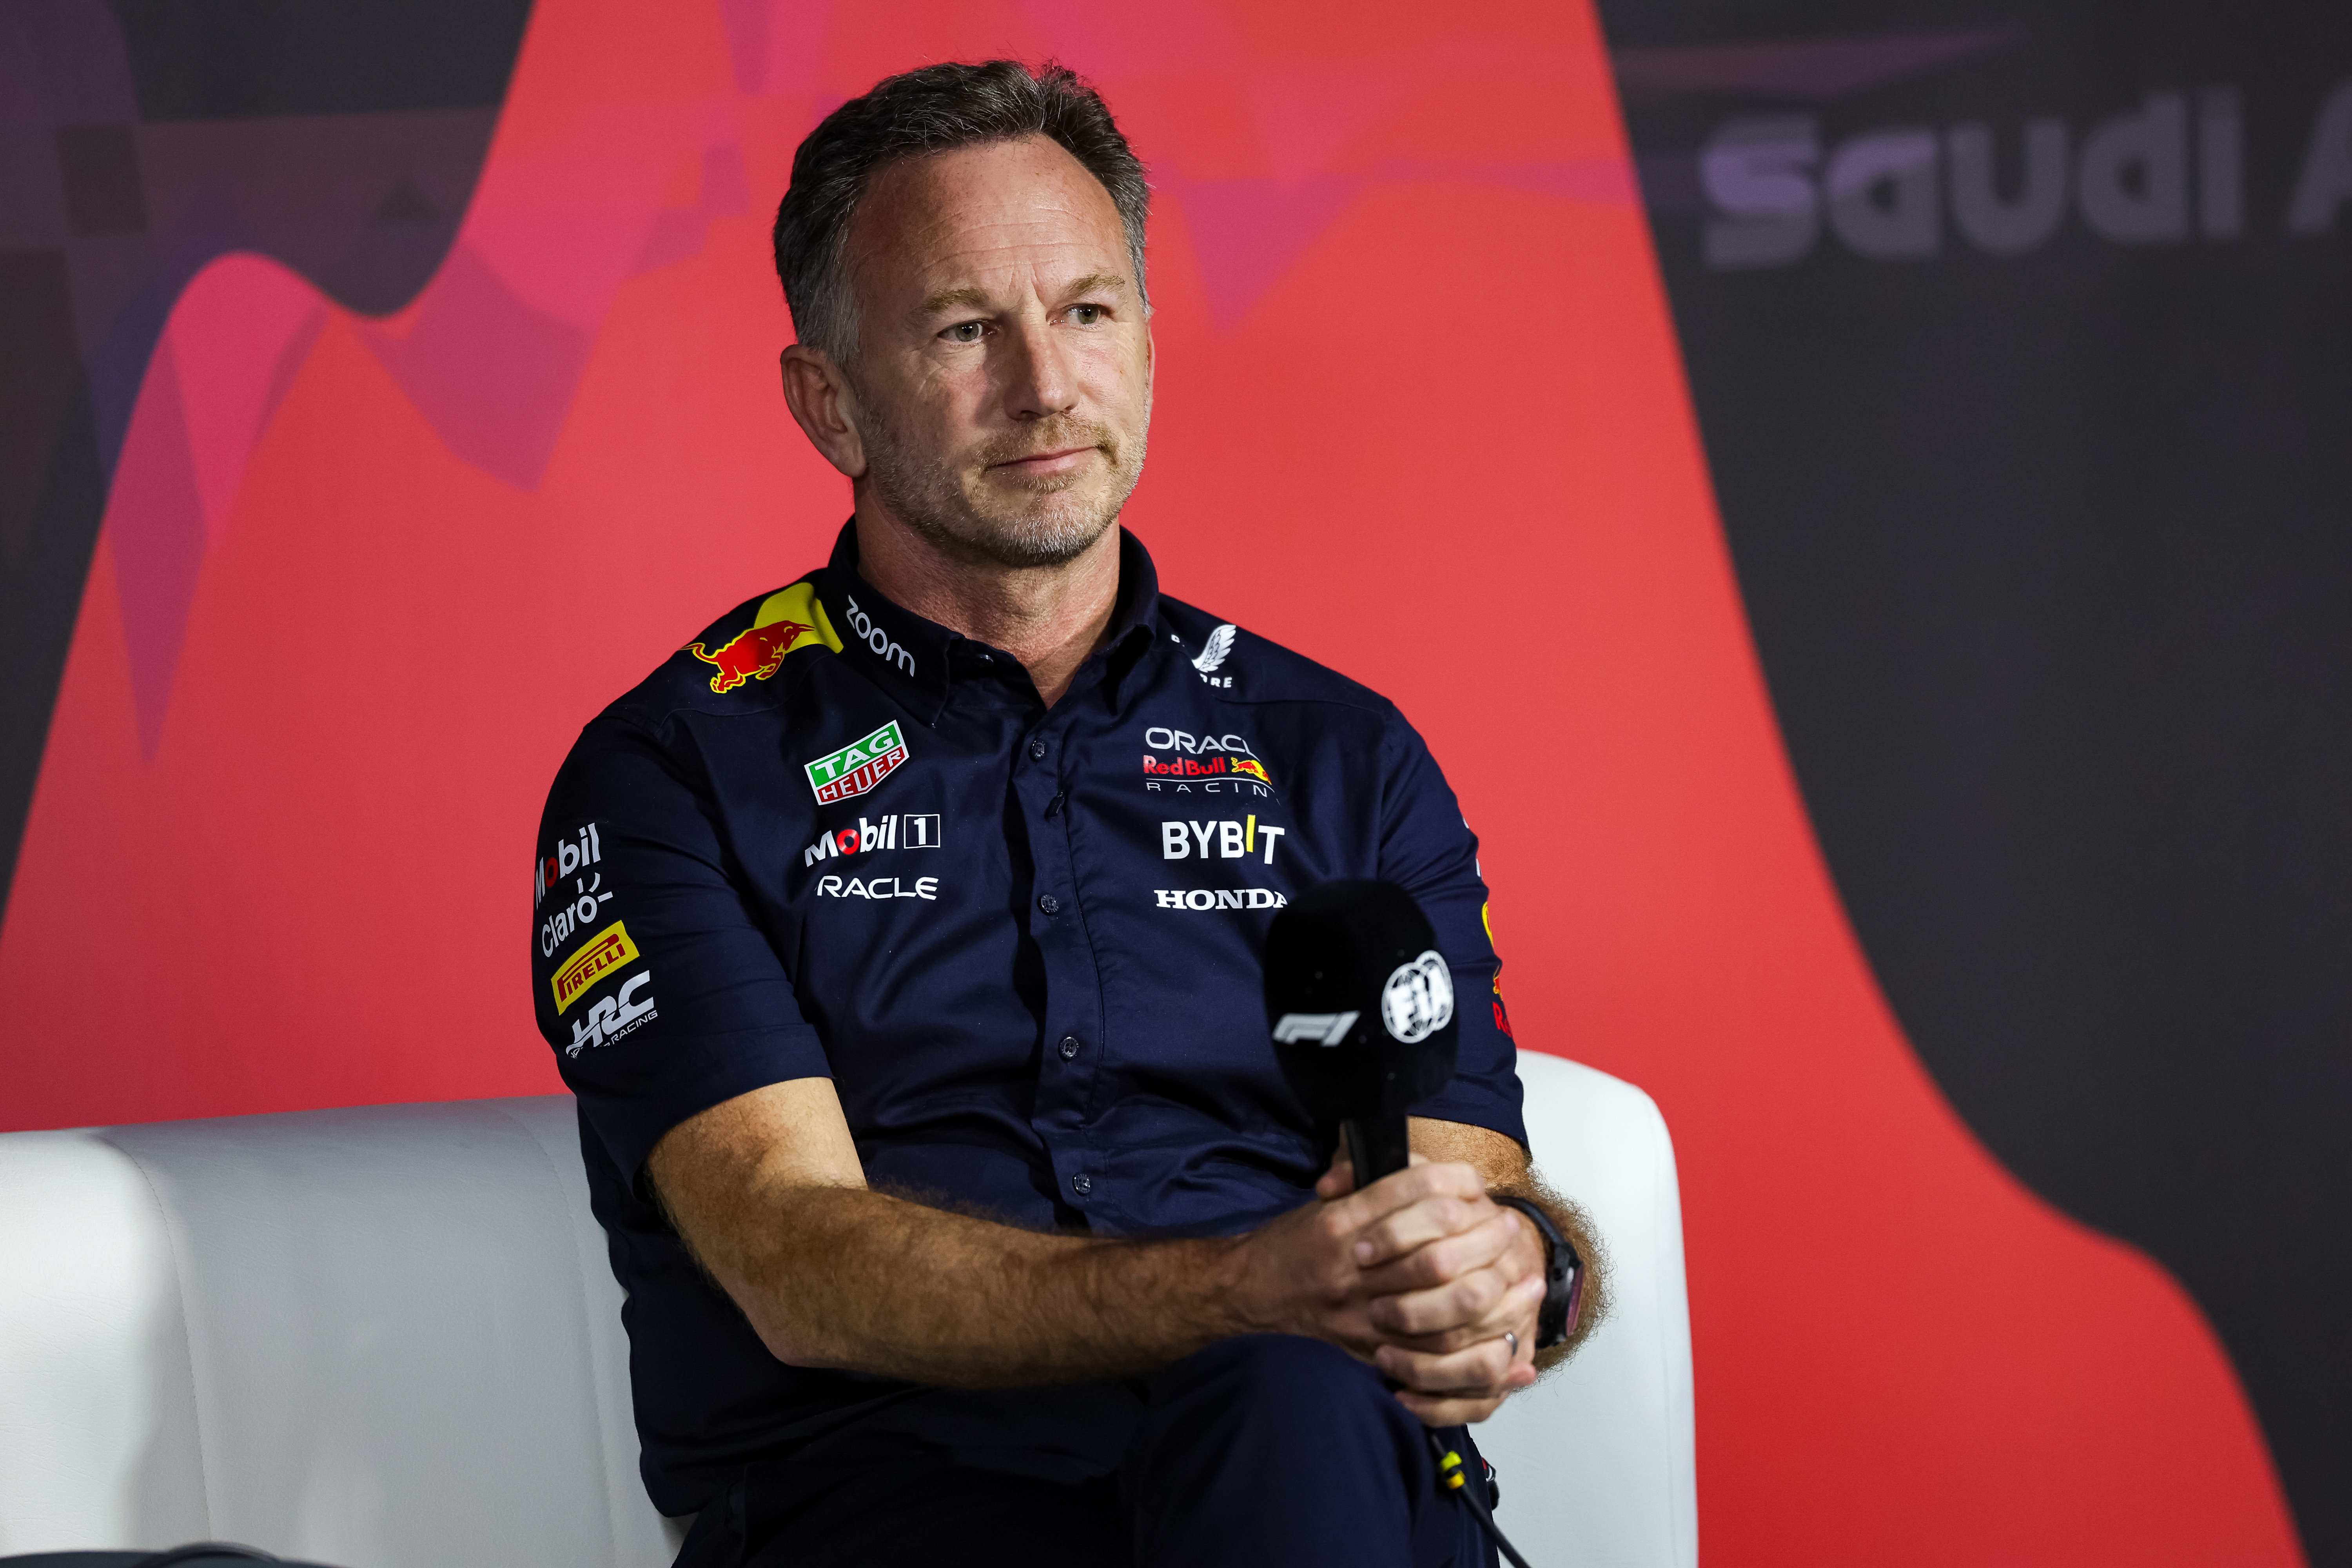 Horner spoke about the embarrassing leak at a press conference